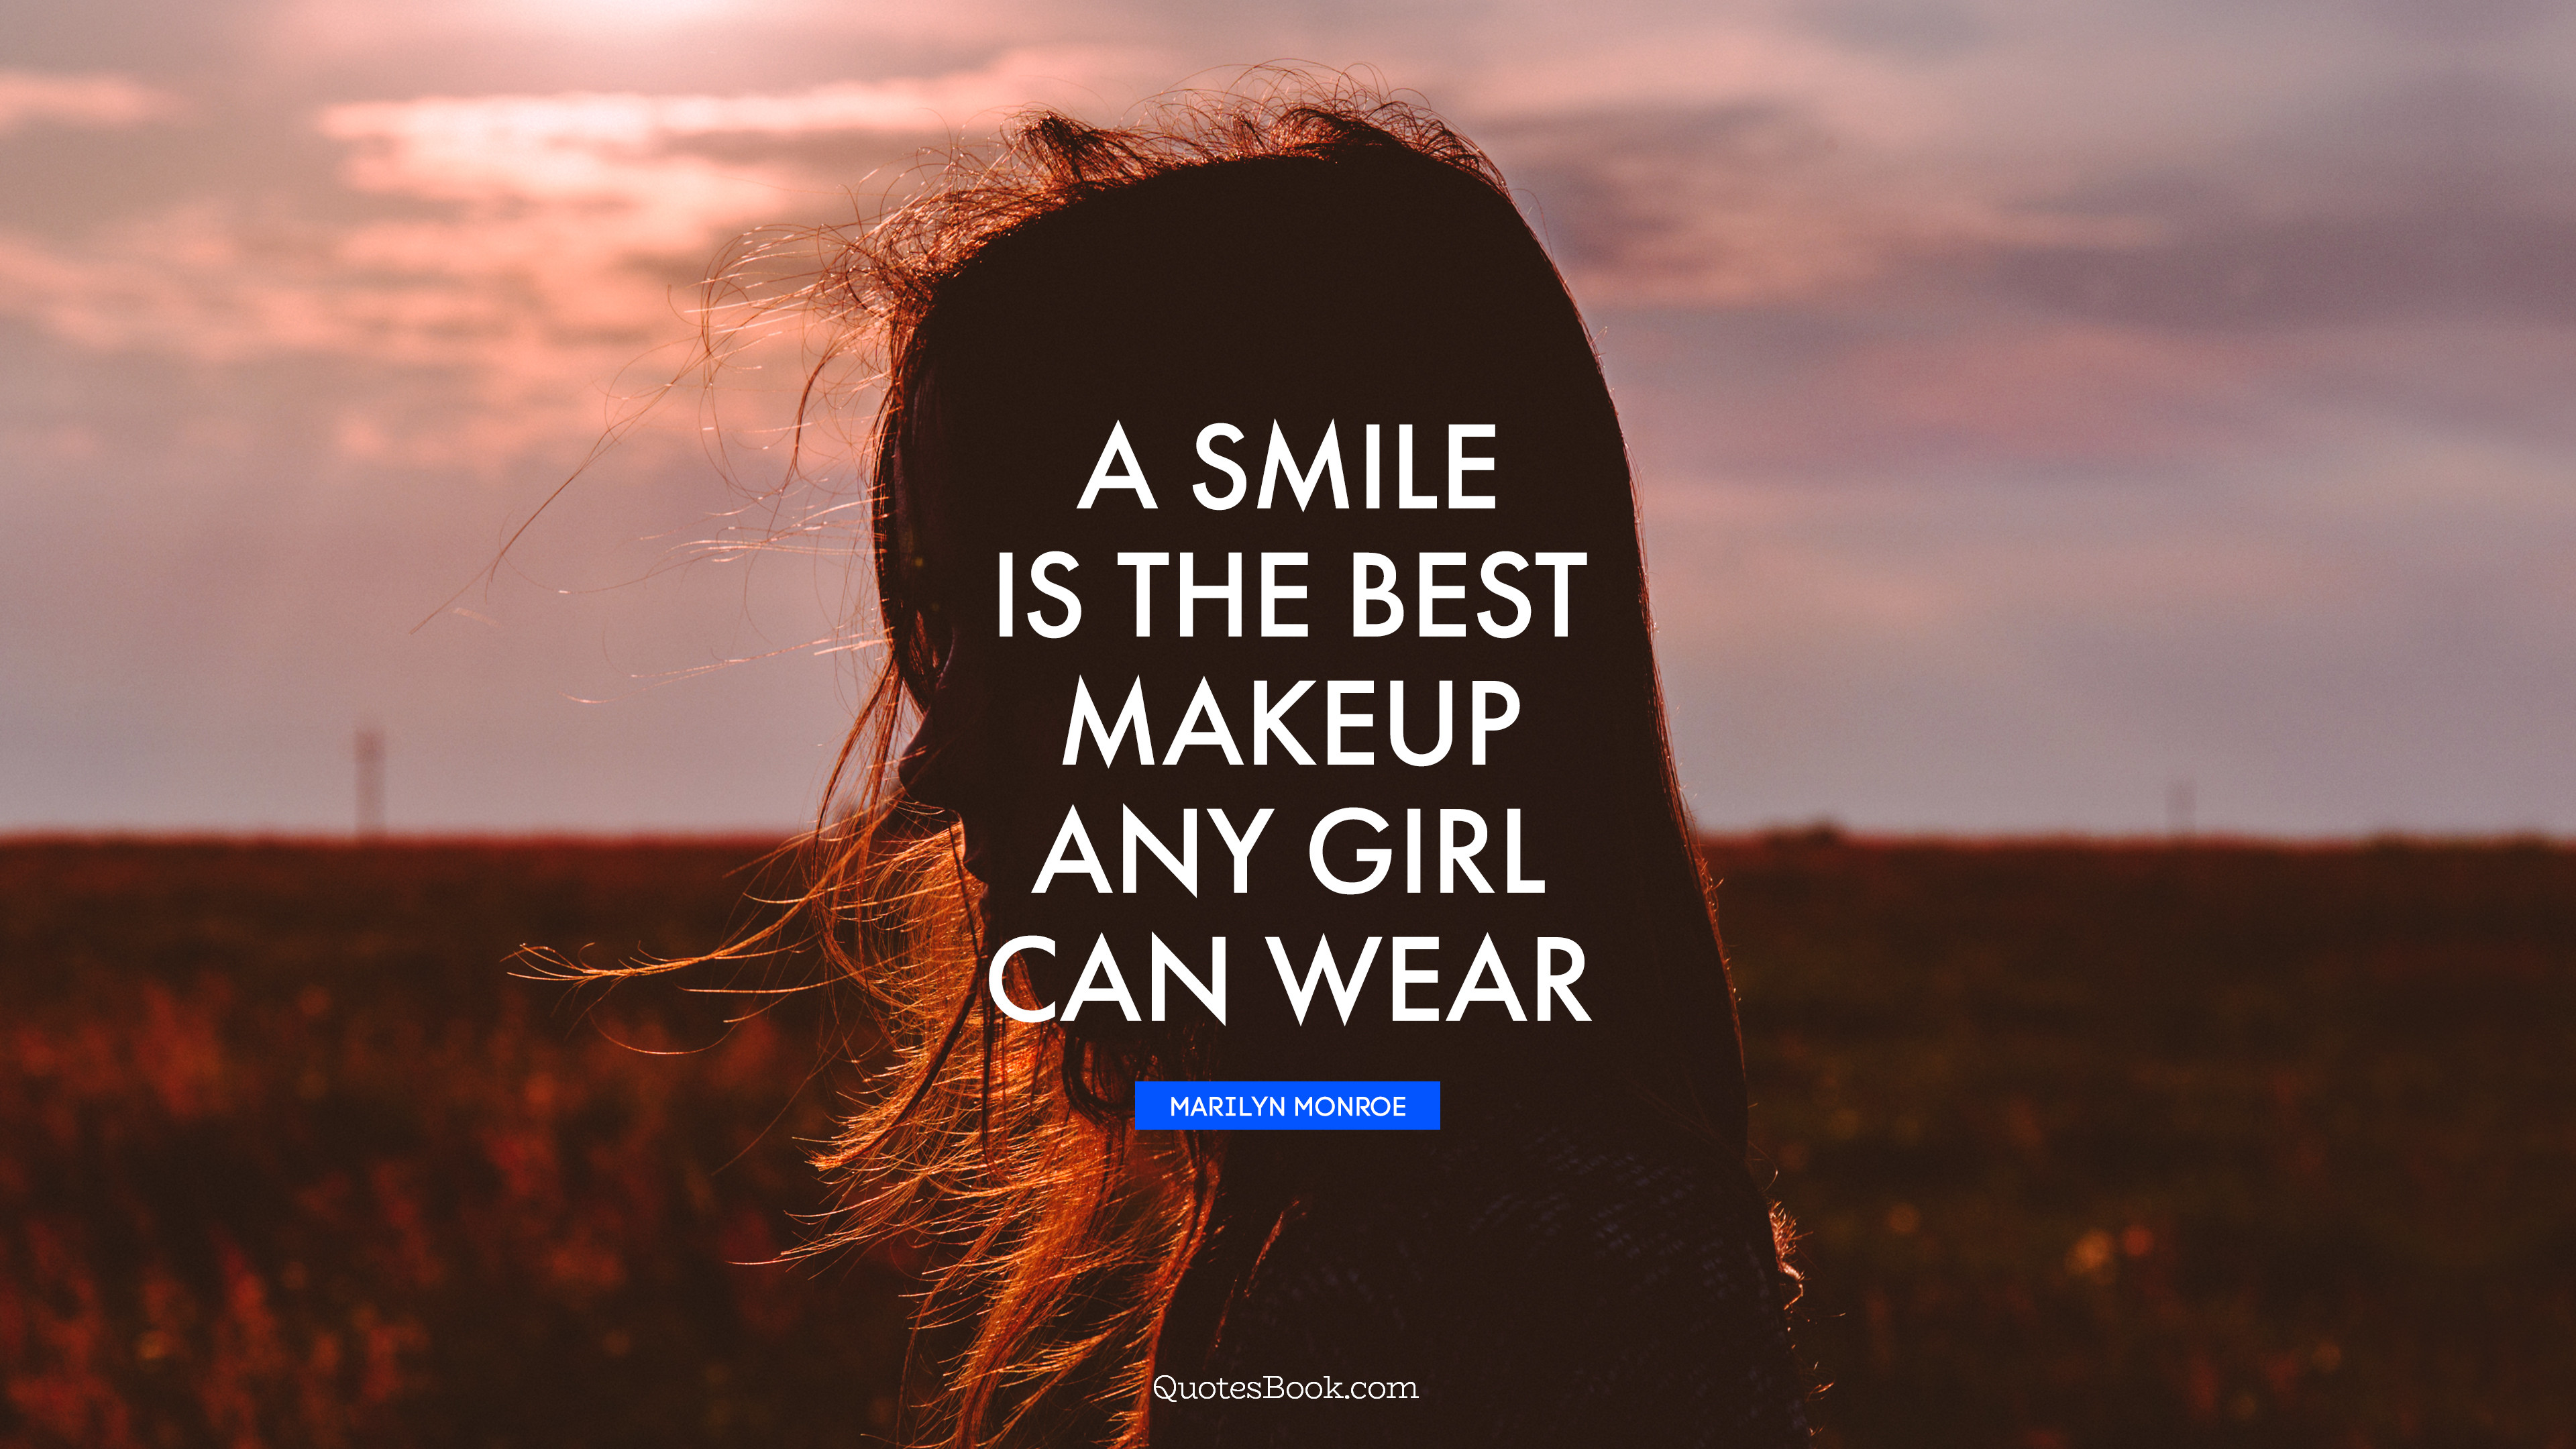 A smile is the best makeup any girl can wear. - Quote by Marilyn Monroe